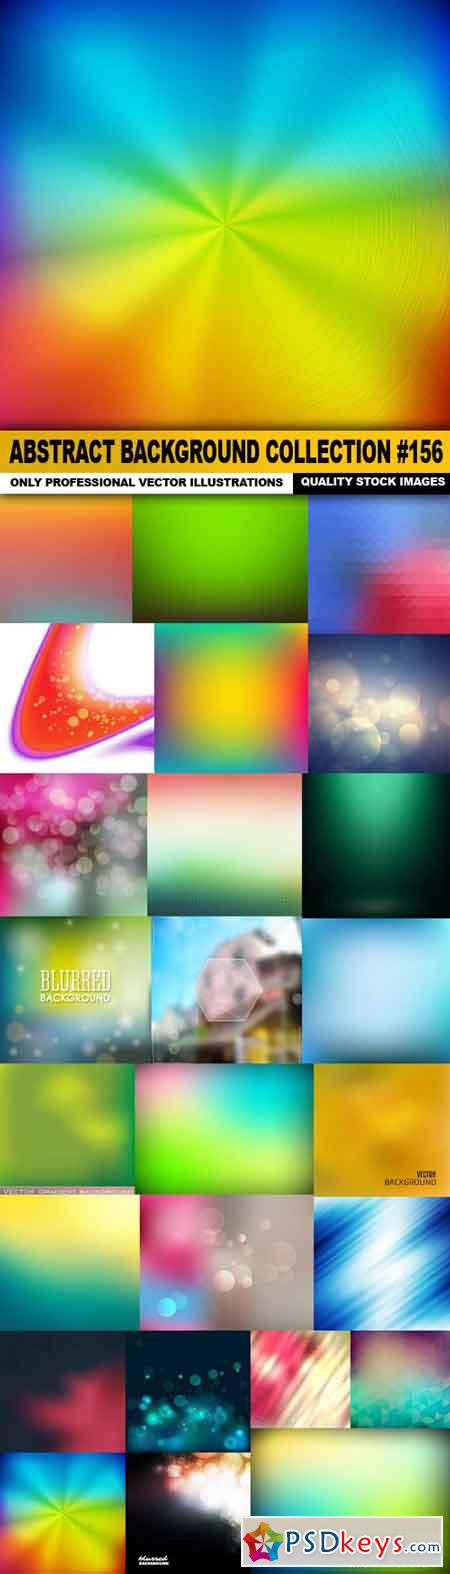 Abstract Background Collection #156 - 25 Vector